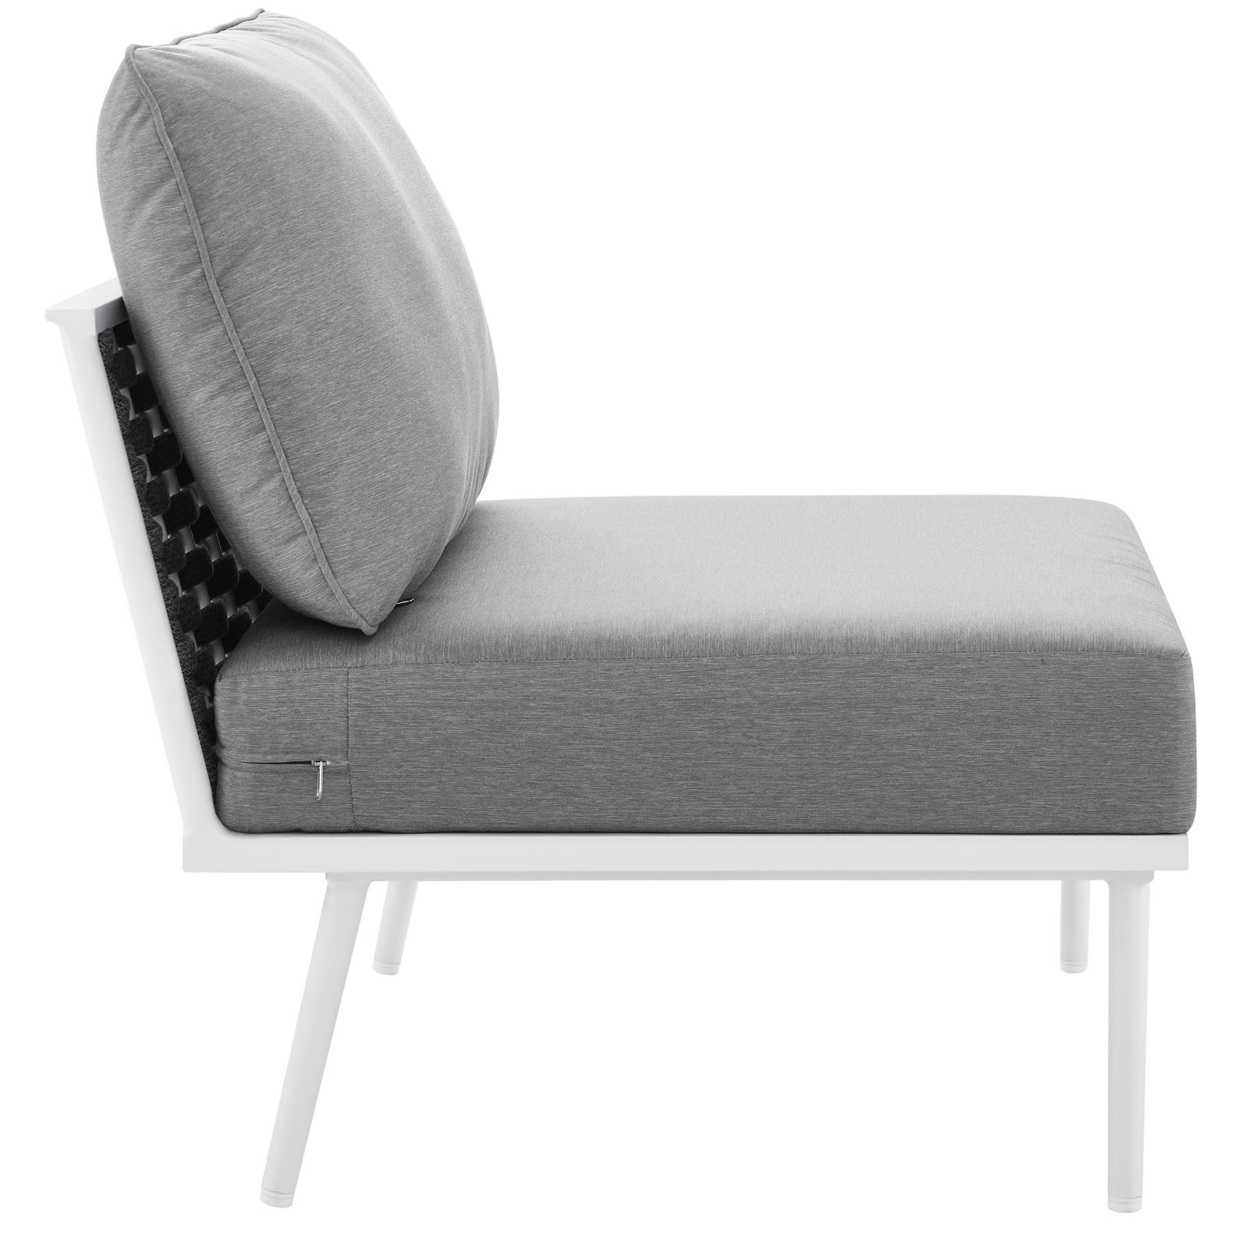 Modway Stance Modern Fabric & Aluminum Outdoor Armless Armchair in Gray - image 3 of 7